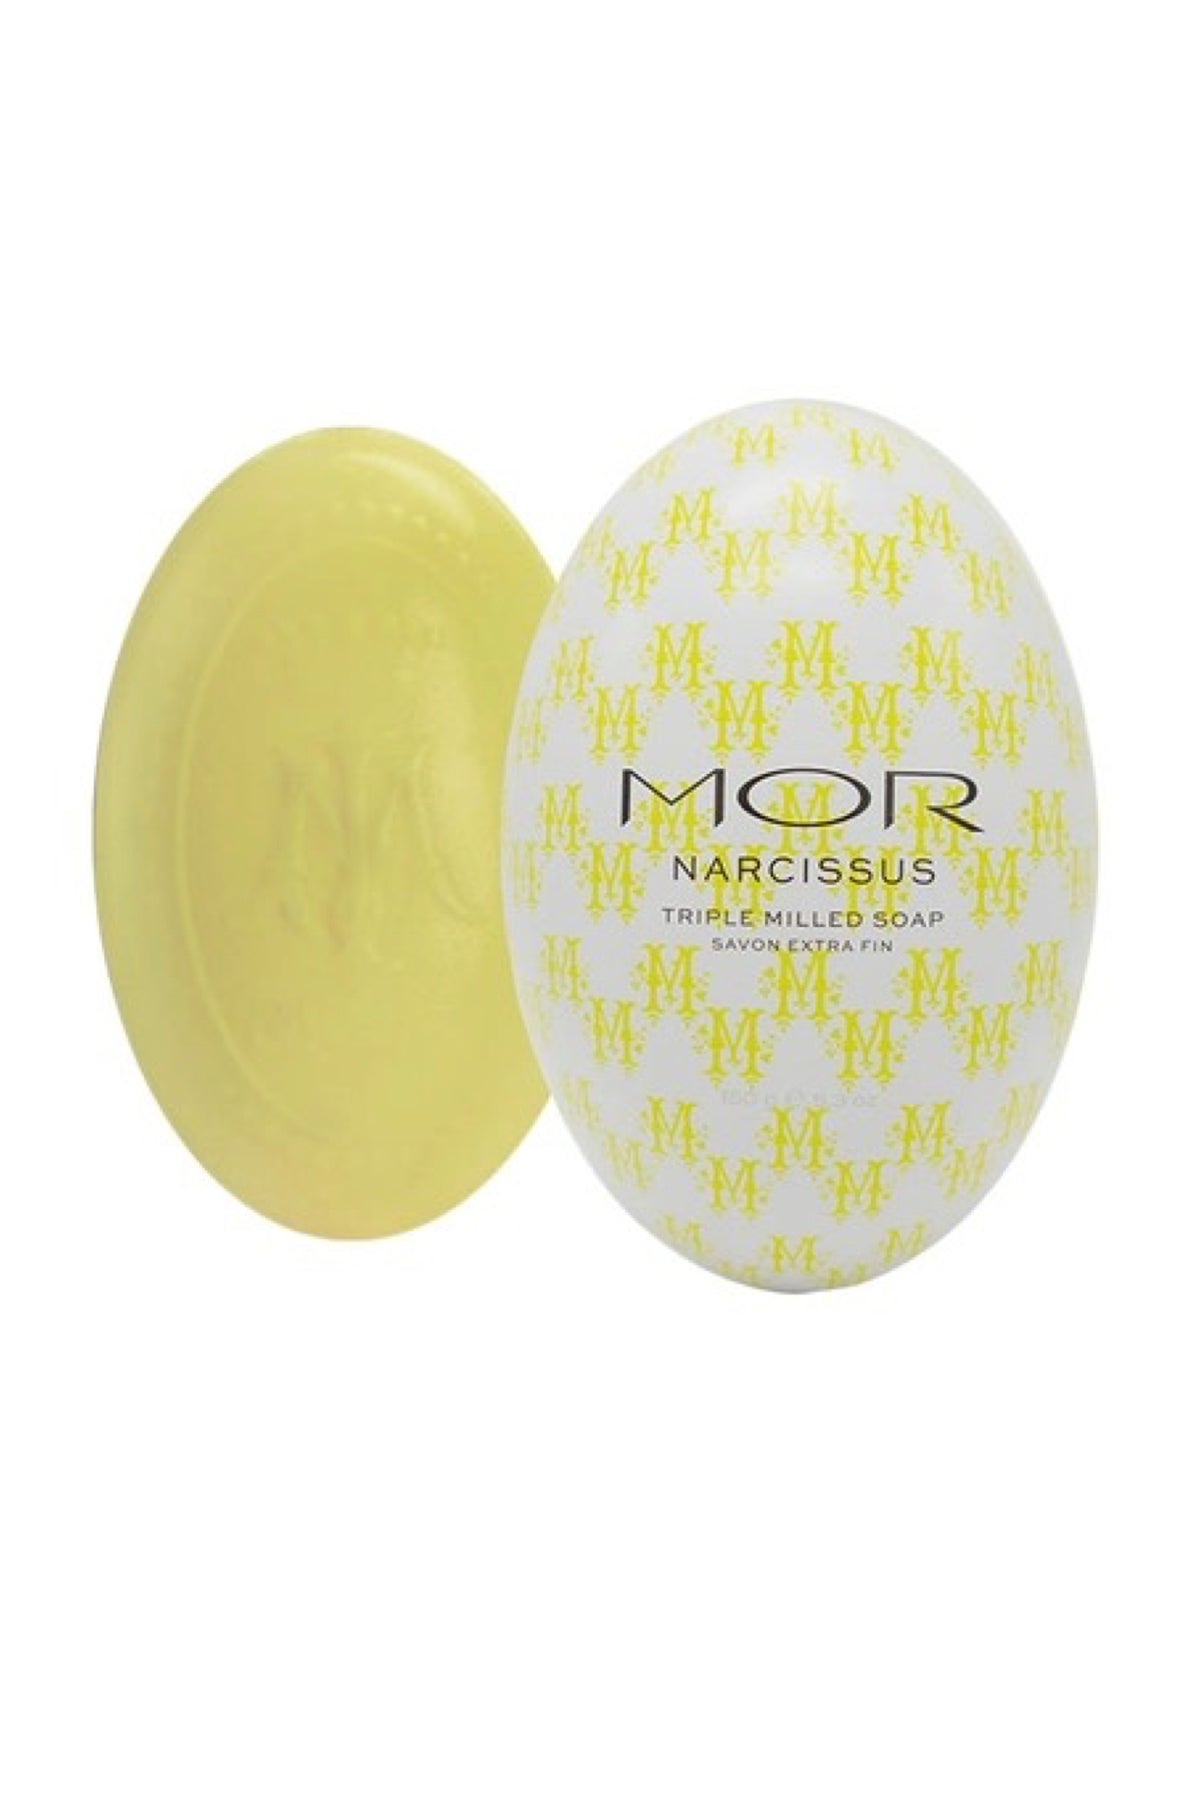 Narcissus Triple Milled Soap